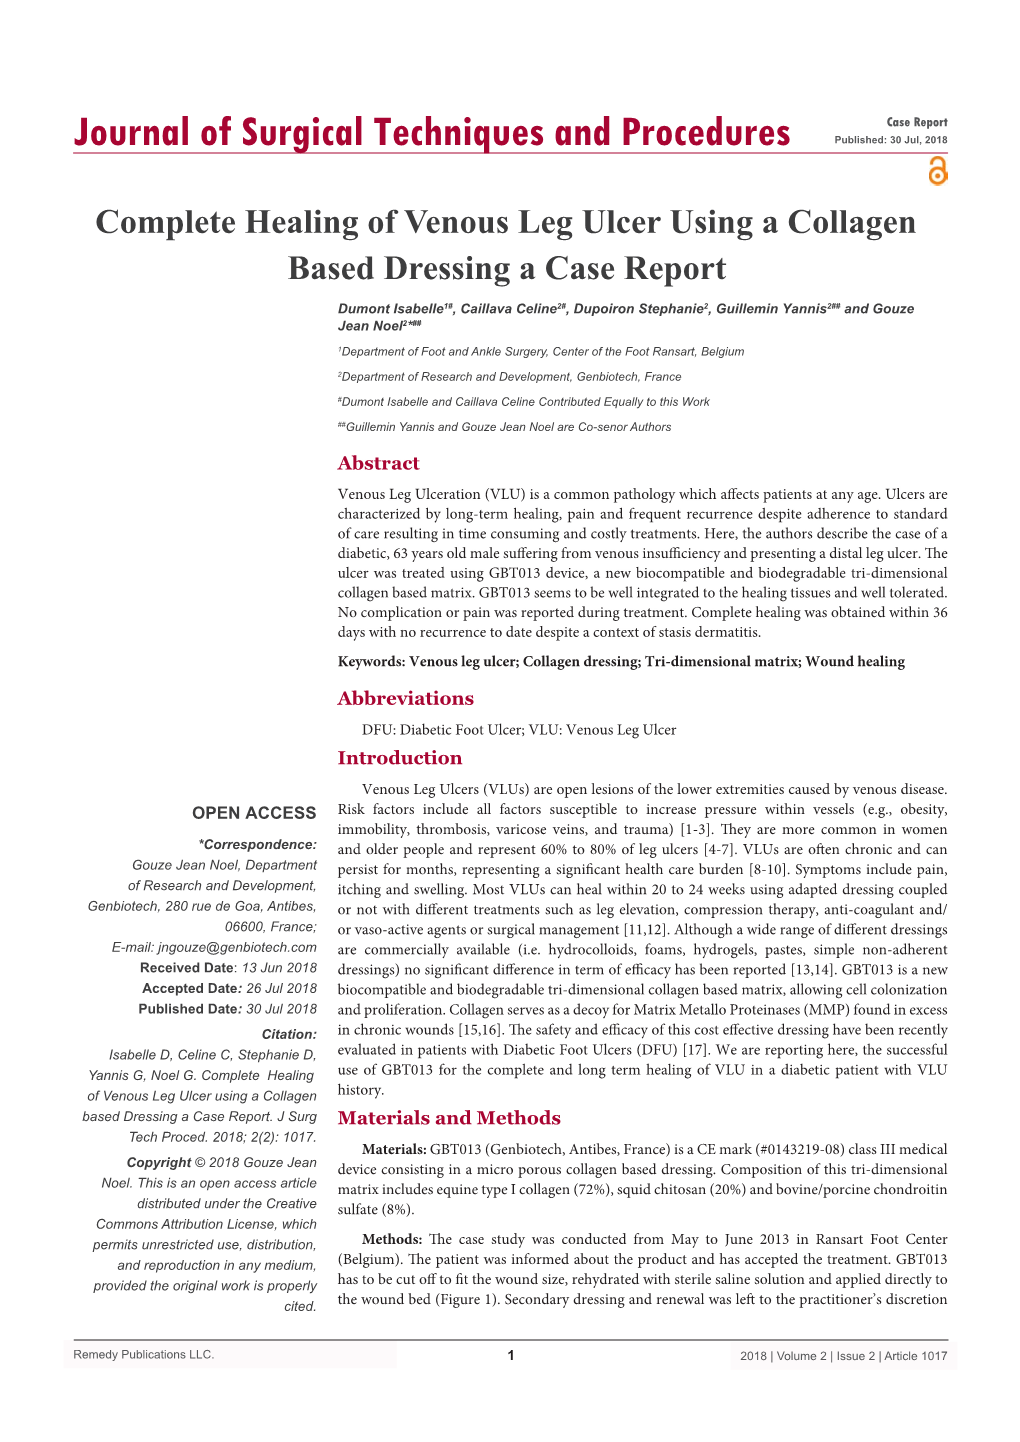 Complete Healing of Venous Leg Ulcer Using a Collagen Based Dressing a Case Report